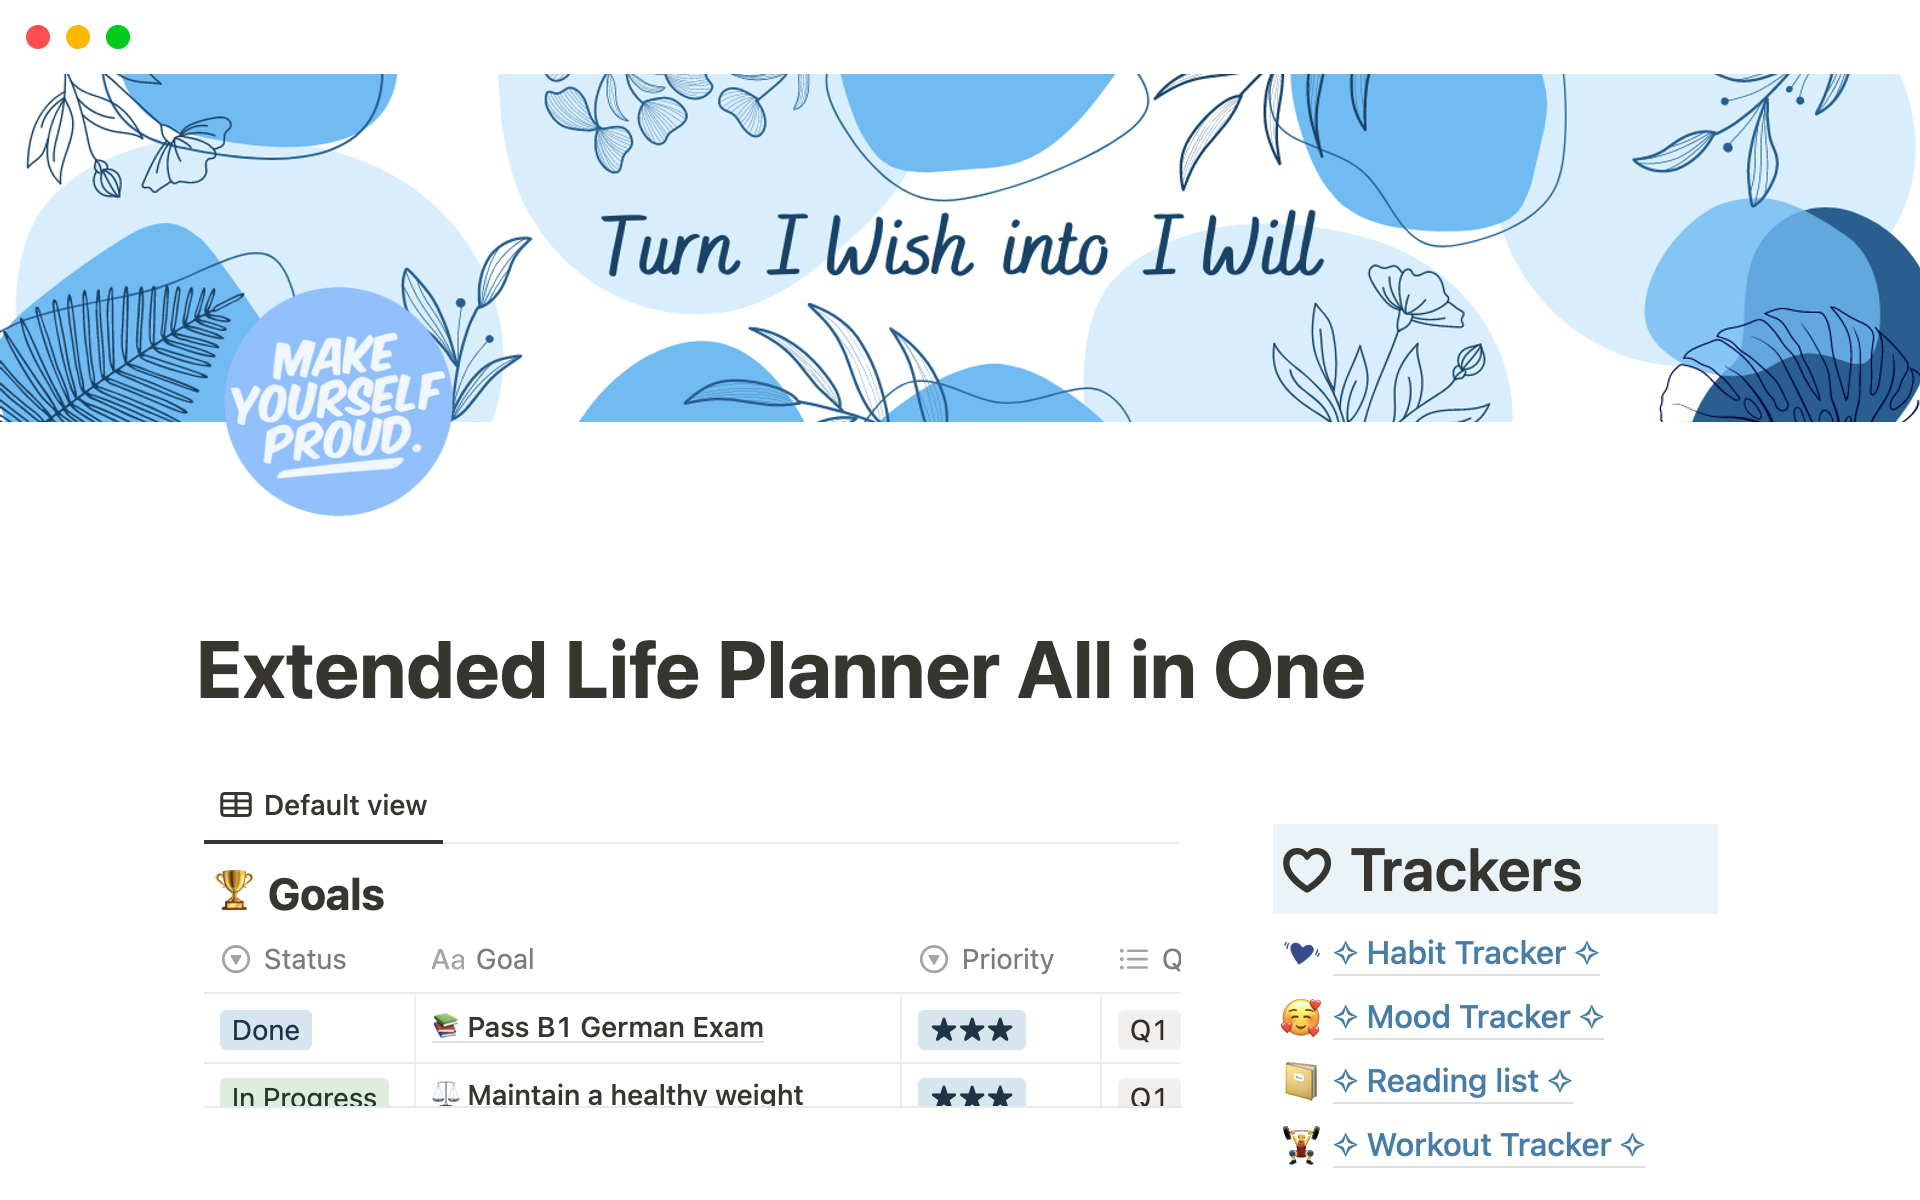 Extended Life Planner All in One Notion Template님의 템플릿 미리보기